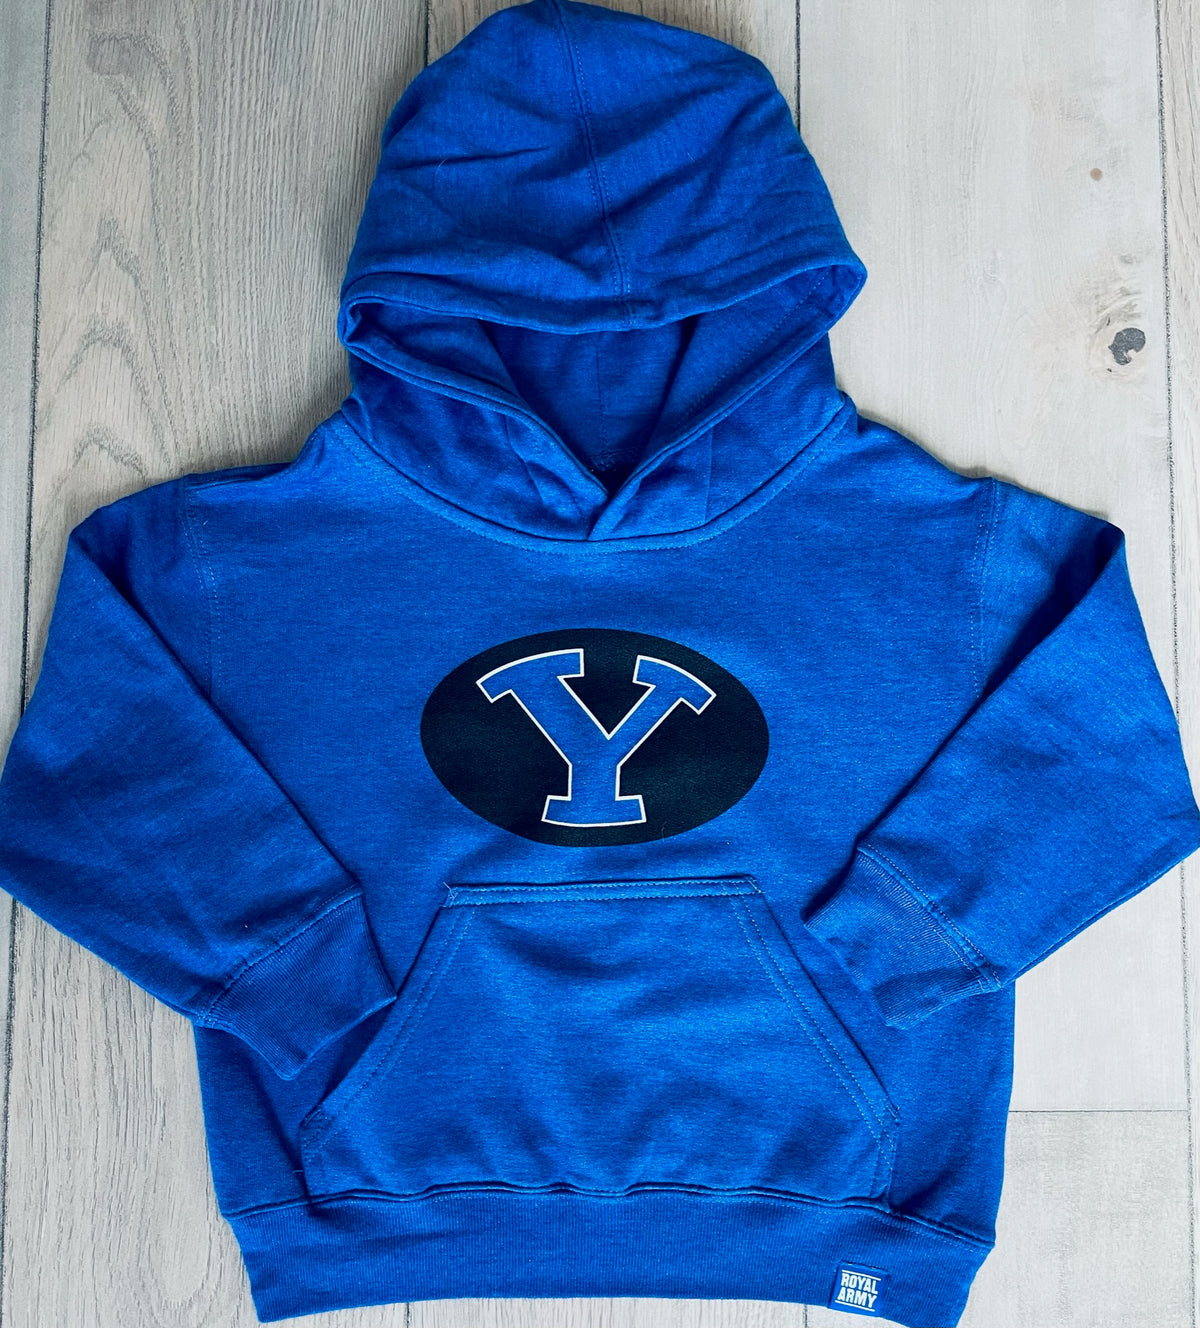 Kids Royal Hoodie with Black, White and Royal BYU Stretch Y